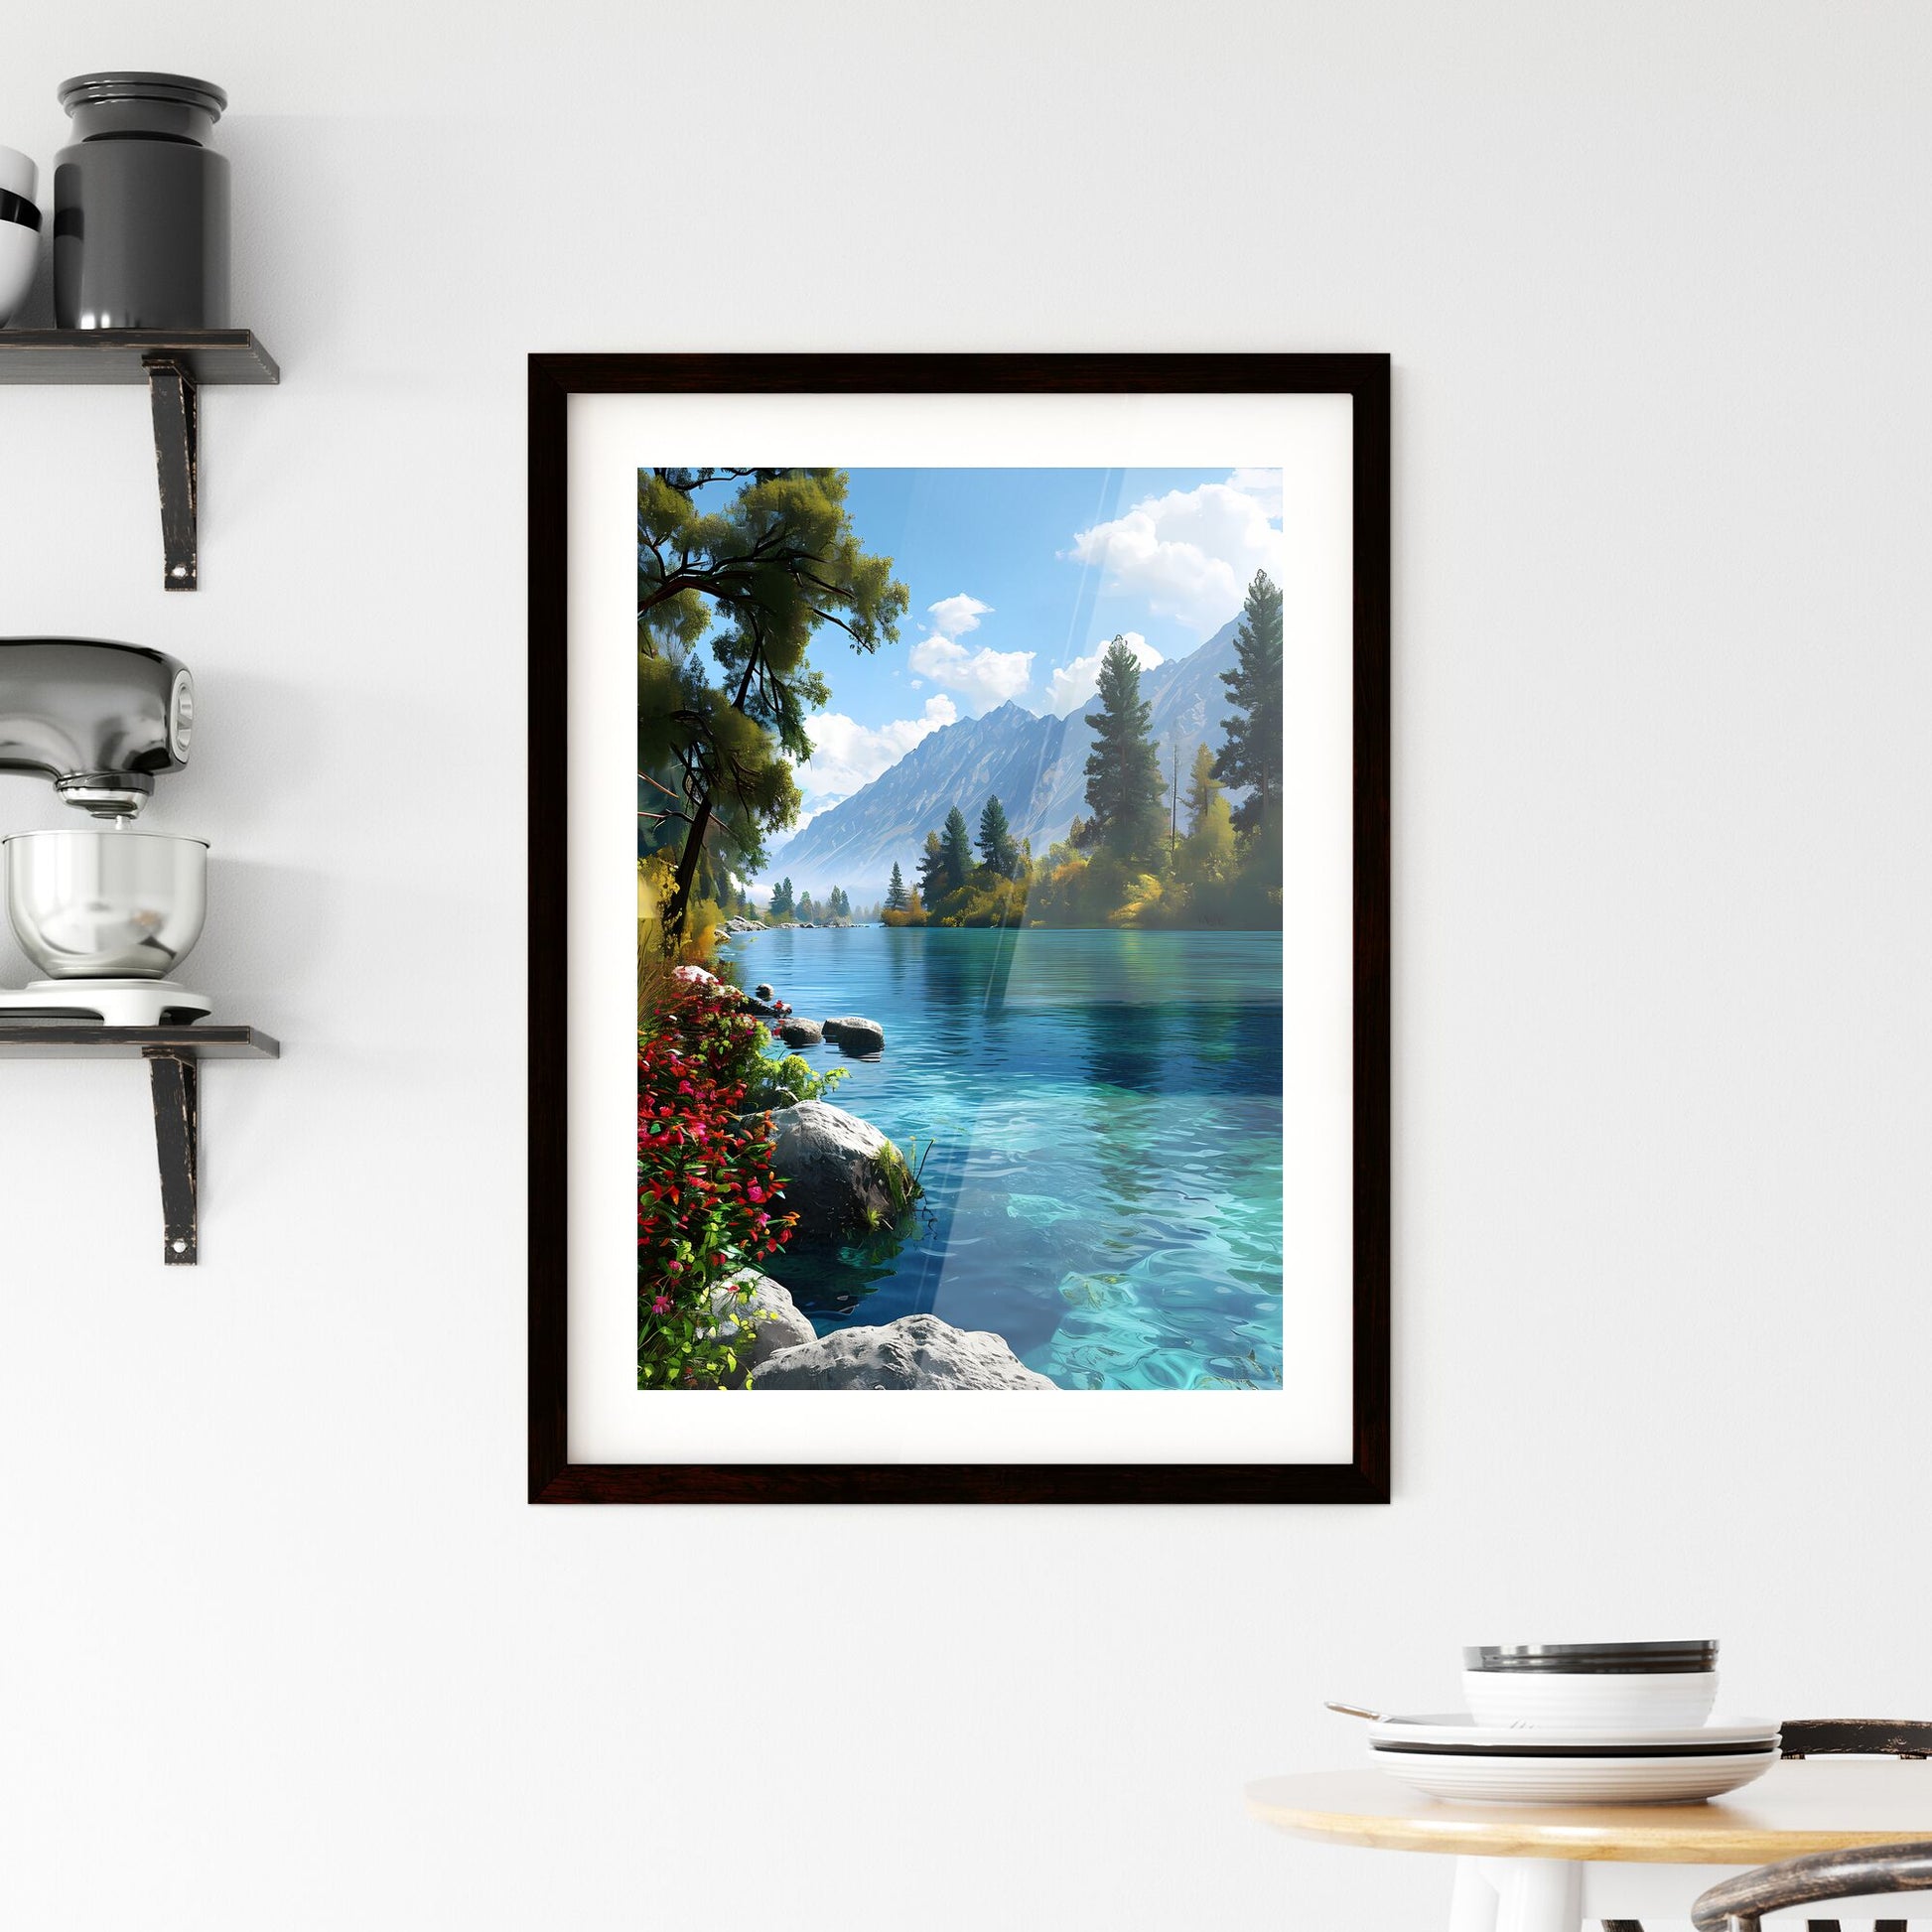 A Poster of Colorado Springs Art Sketch with clear blue Background - A Lake Surrounded By Trees And Mountains Default Title